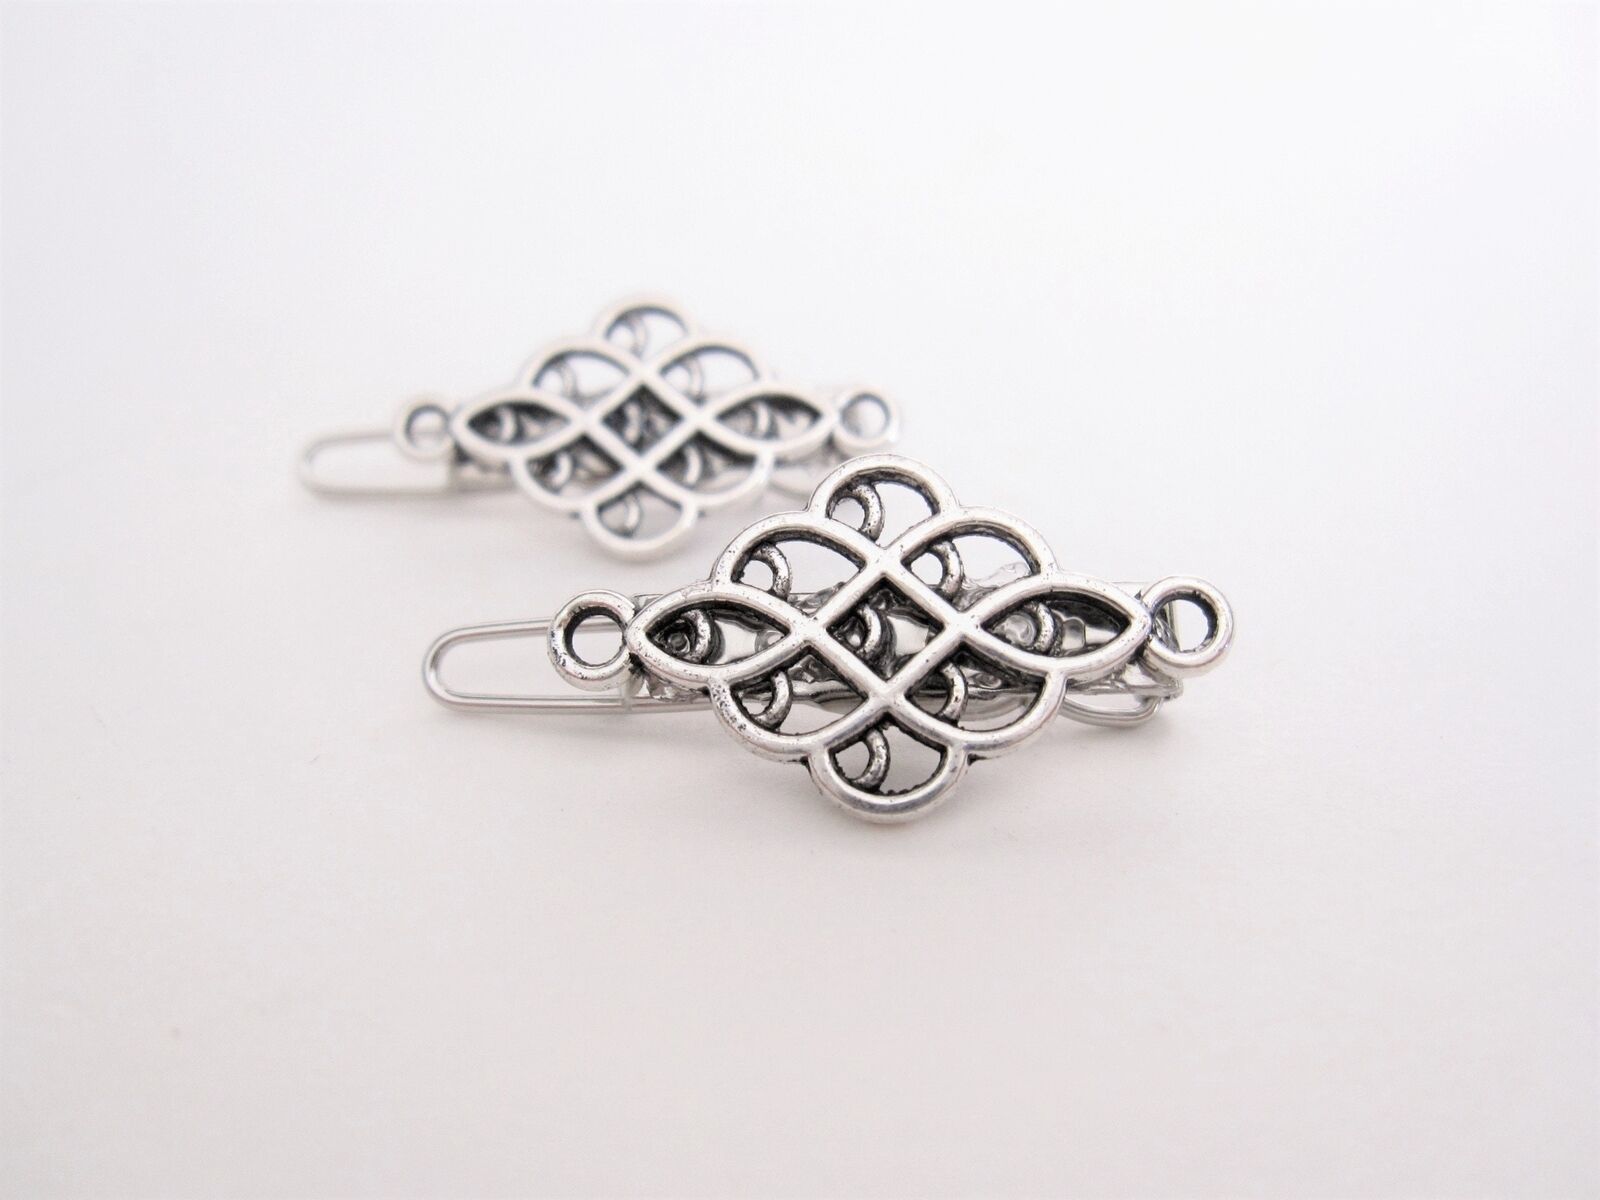 Primary image for 2 extra tiny small silver metal knot hair pin clip barrette fine thin hair